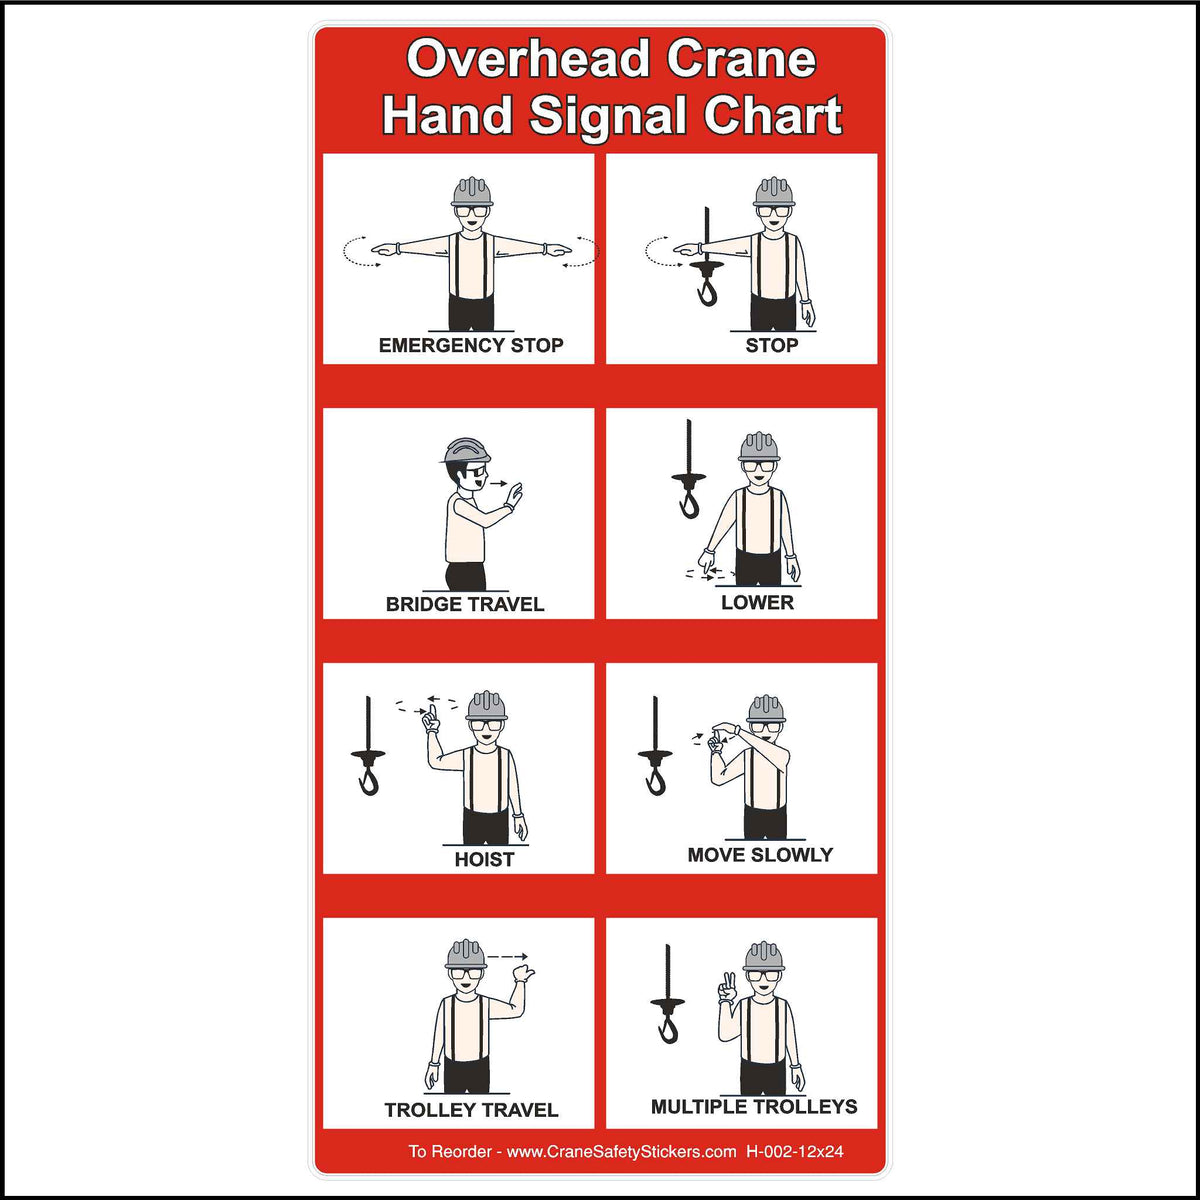 Overhead Crane Hand Signal Chart with all hand signals. 12 inches by 24 inches in size.